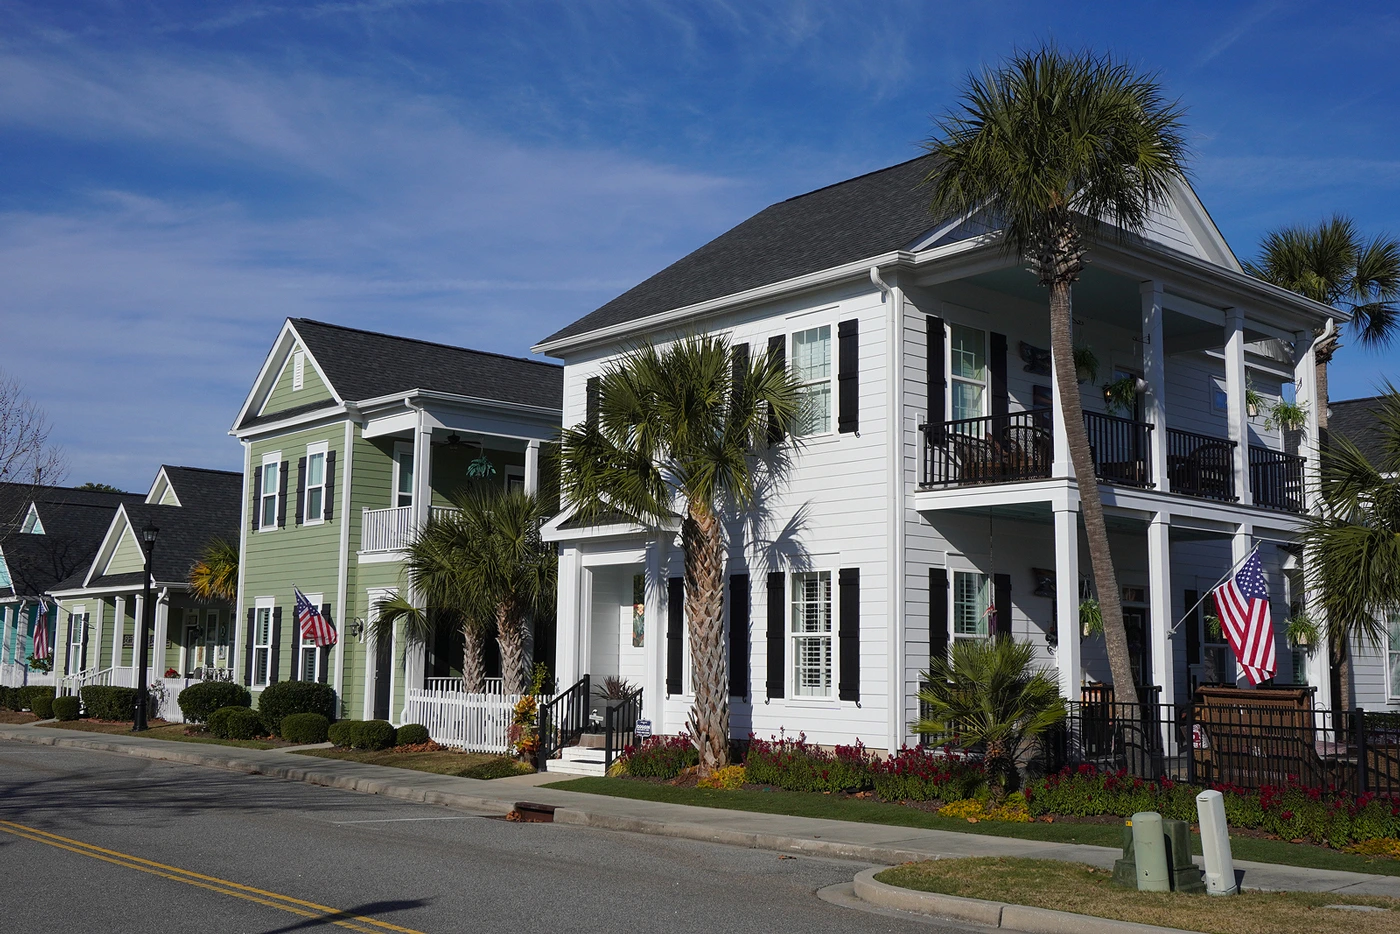 5 Things To Know When Buying a Home in Myrtle Beach